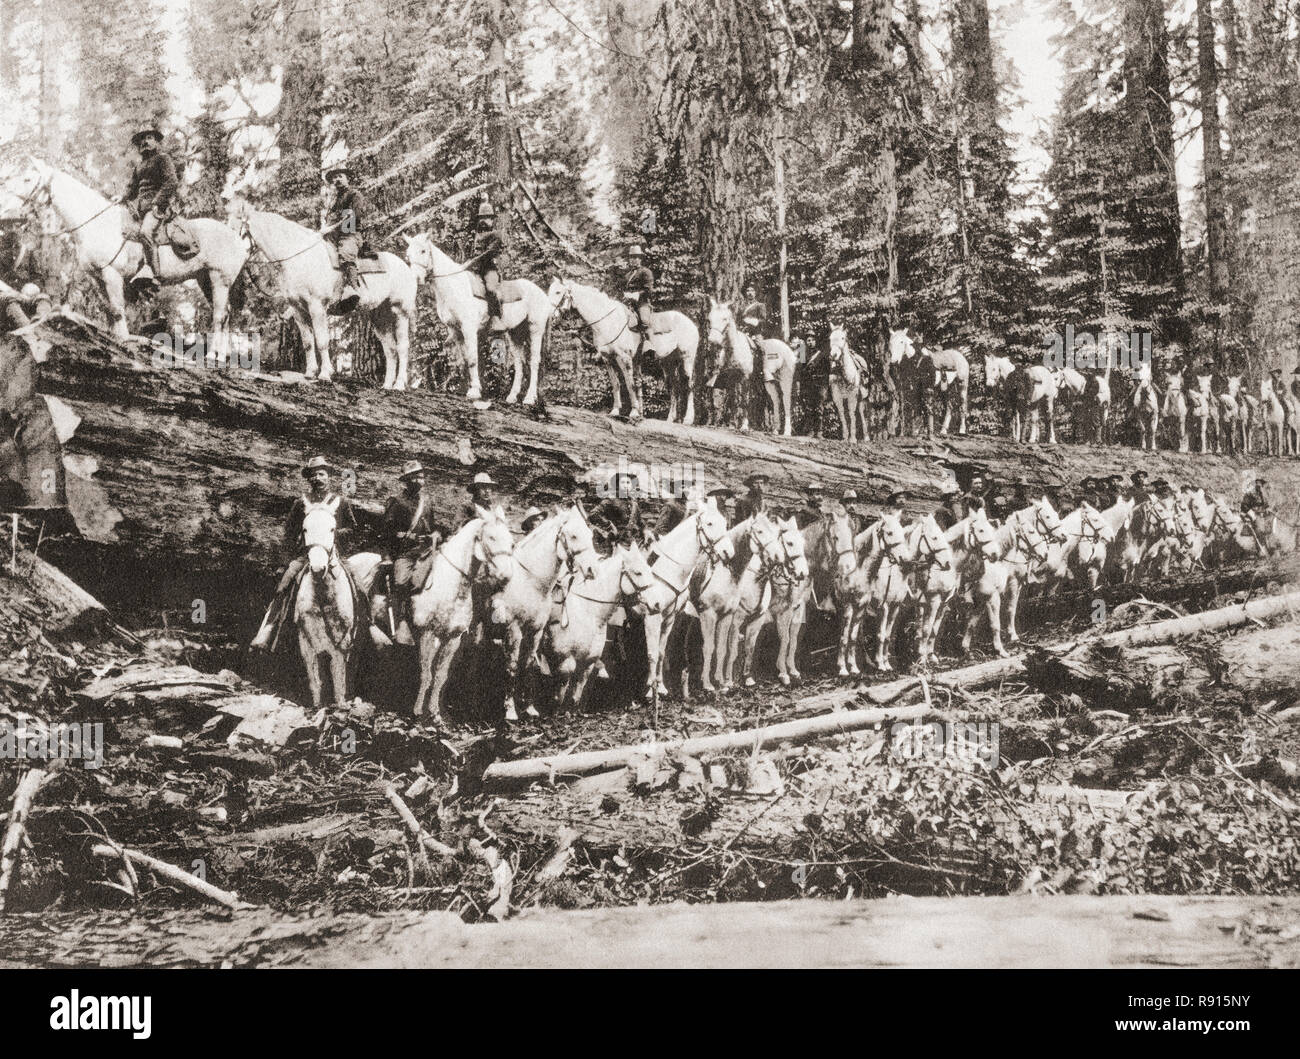 A troop of United States Cavalry posing on and alongside of a fallen redwood tree, California, United States of America, c. 1915.  From Wonderful California, published 1915. Stock Photo